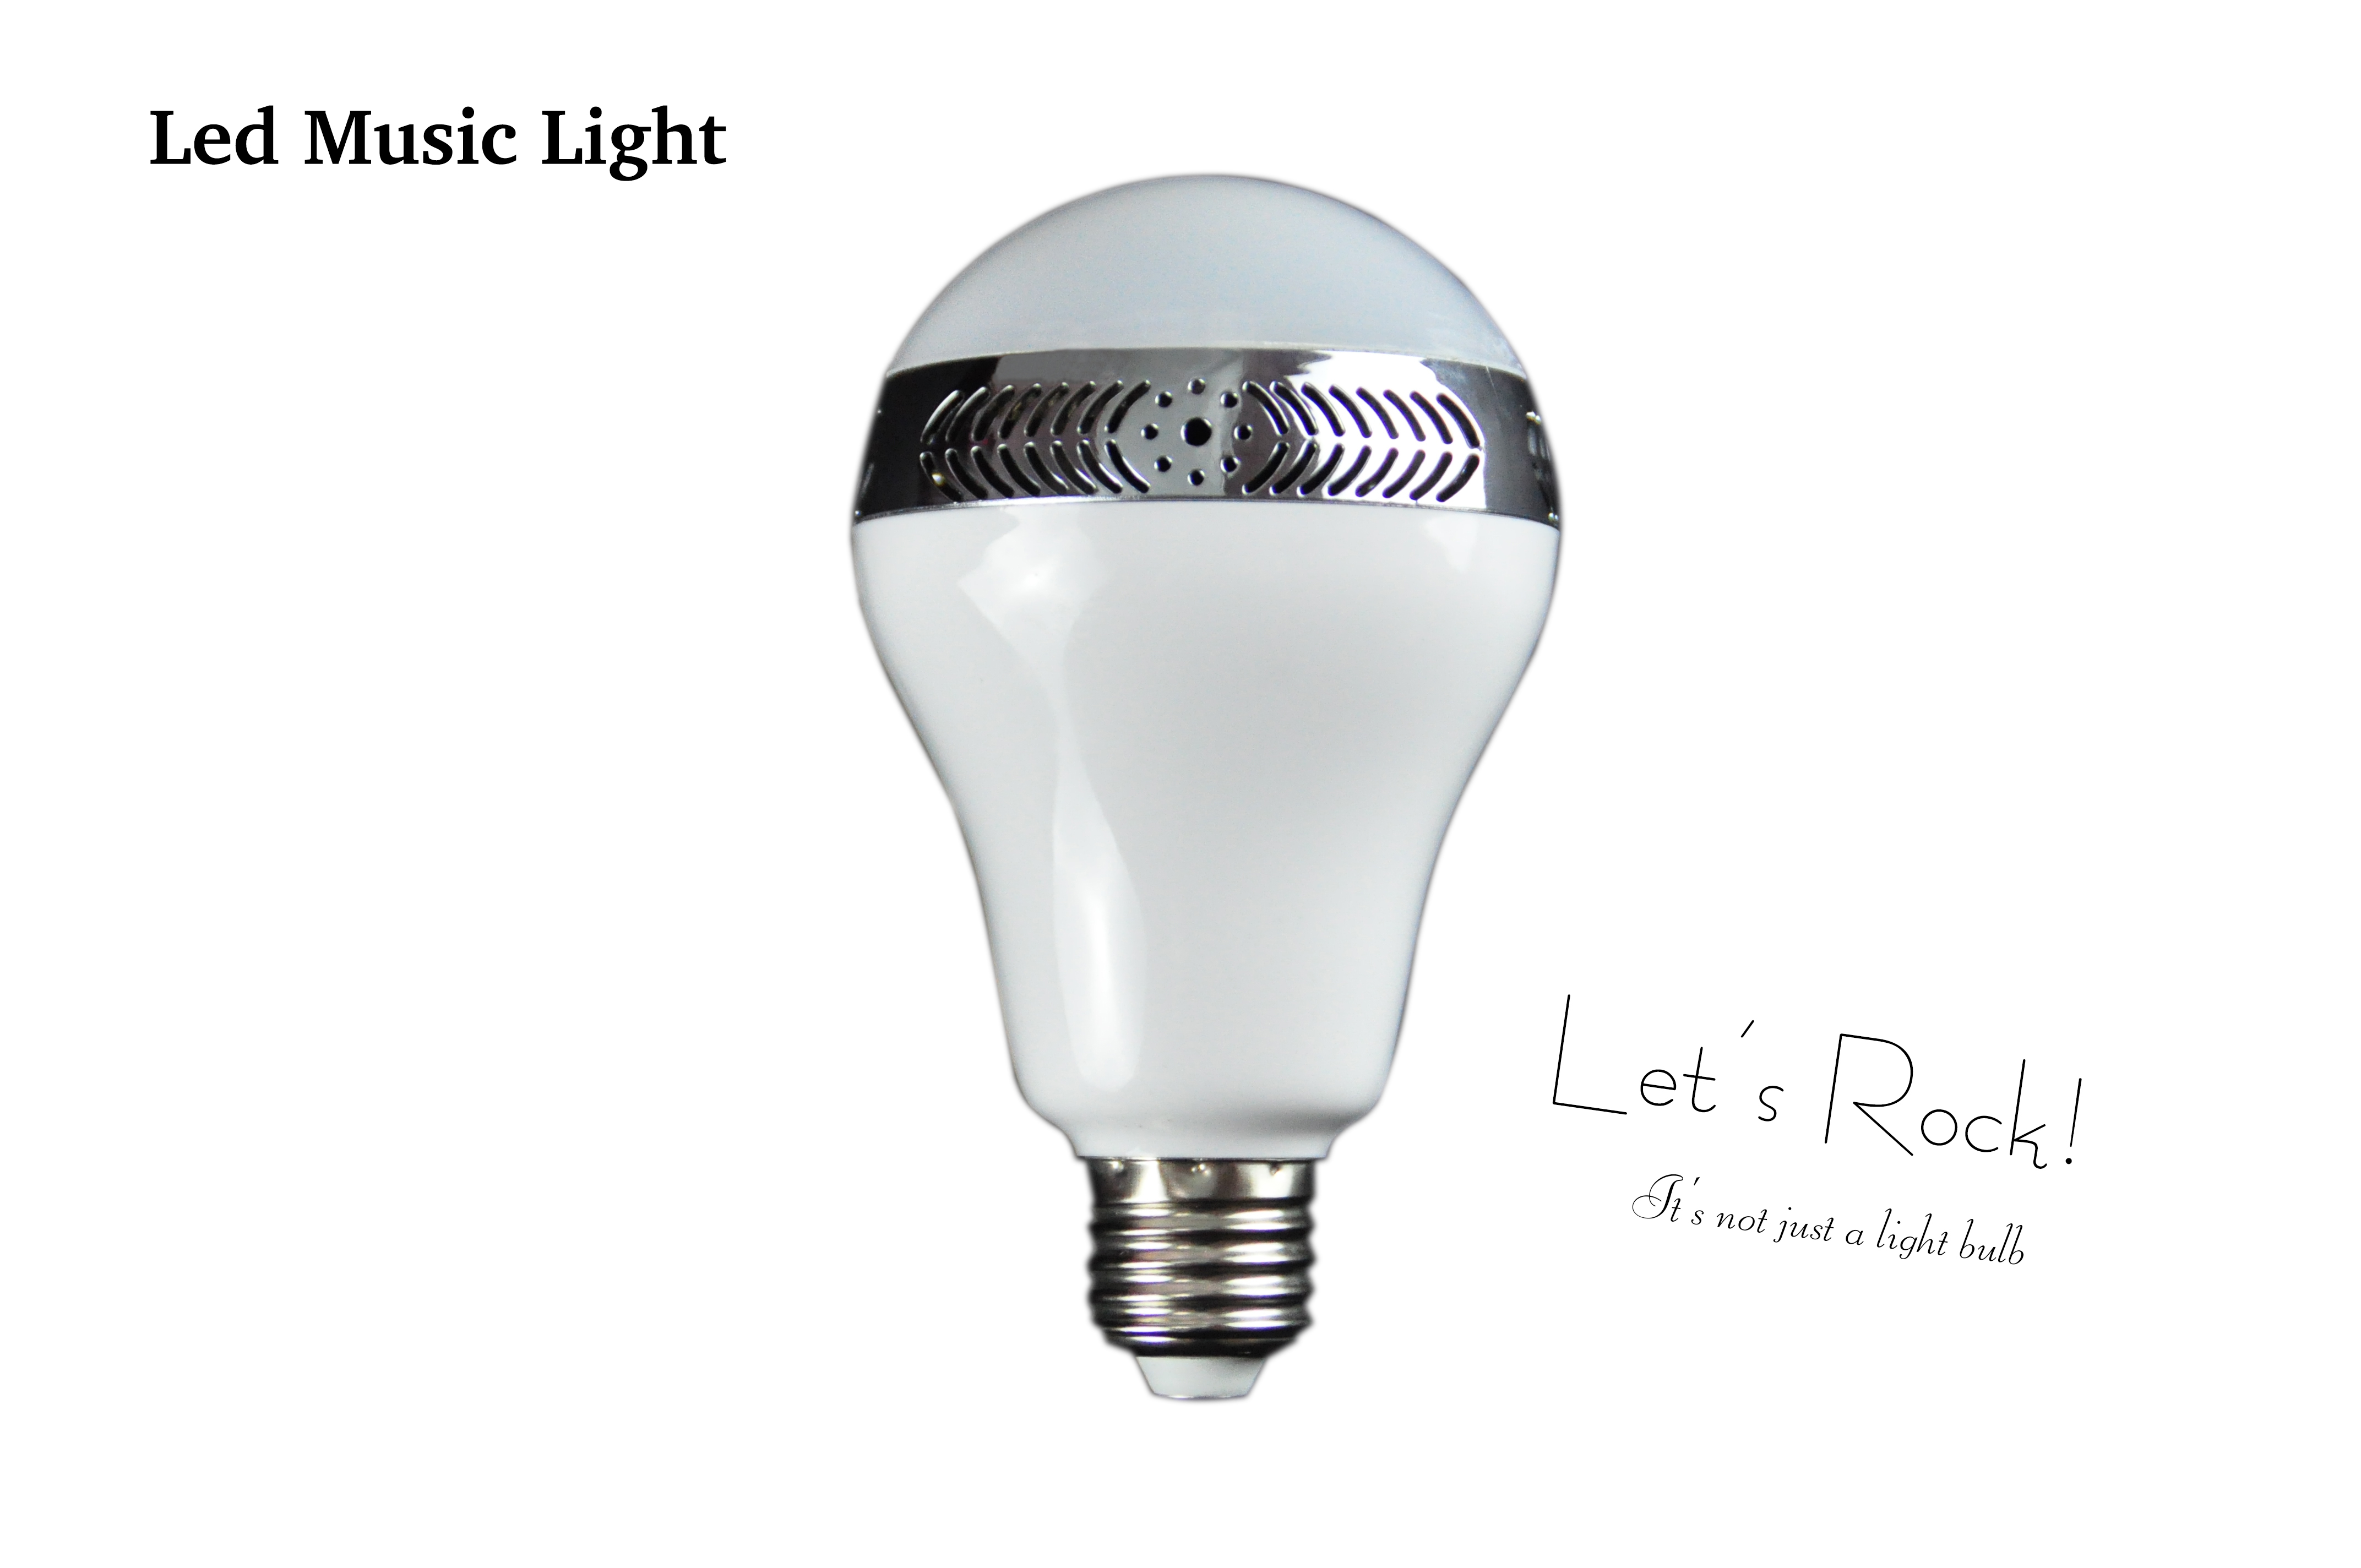 Music bulb light/multifunction with LED light mini speaker and Bluetooth controlling